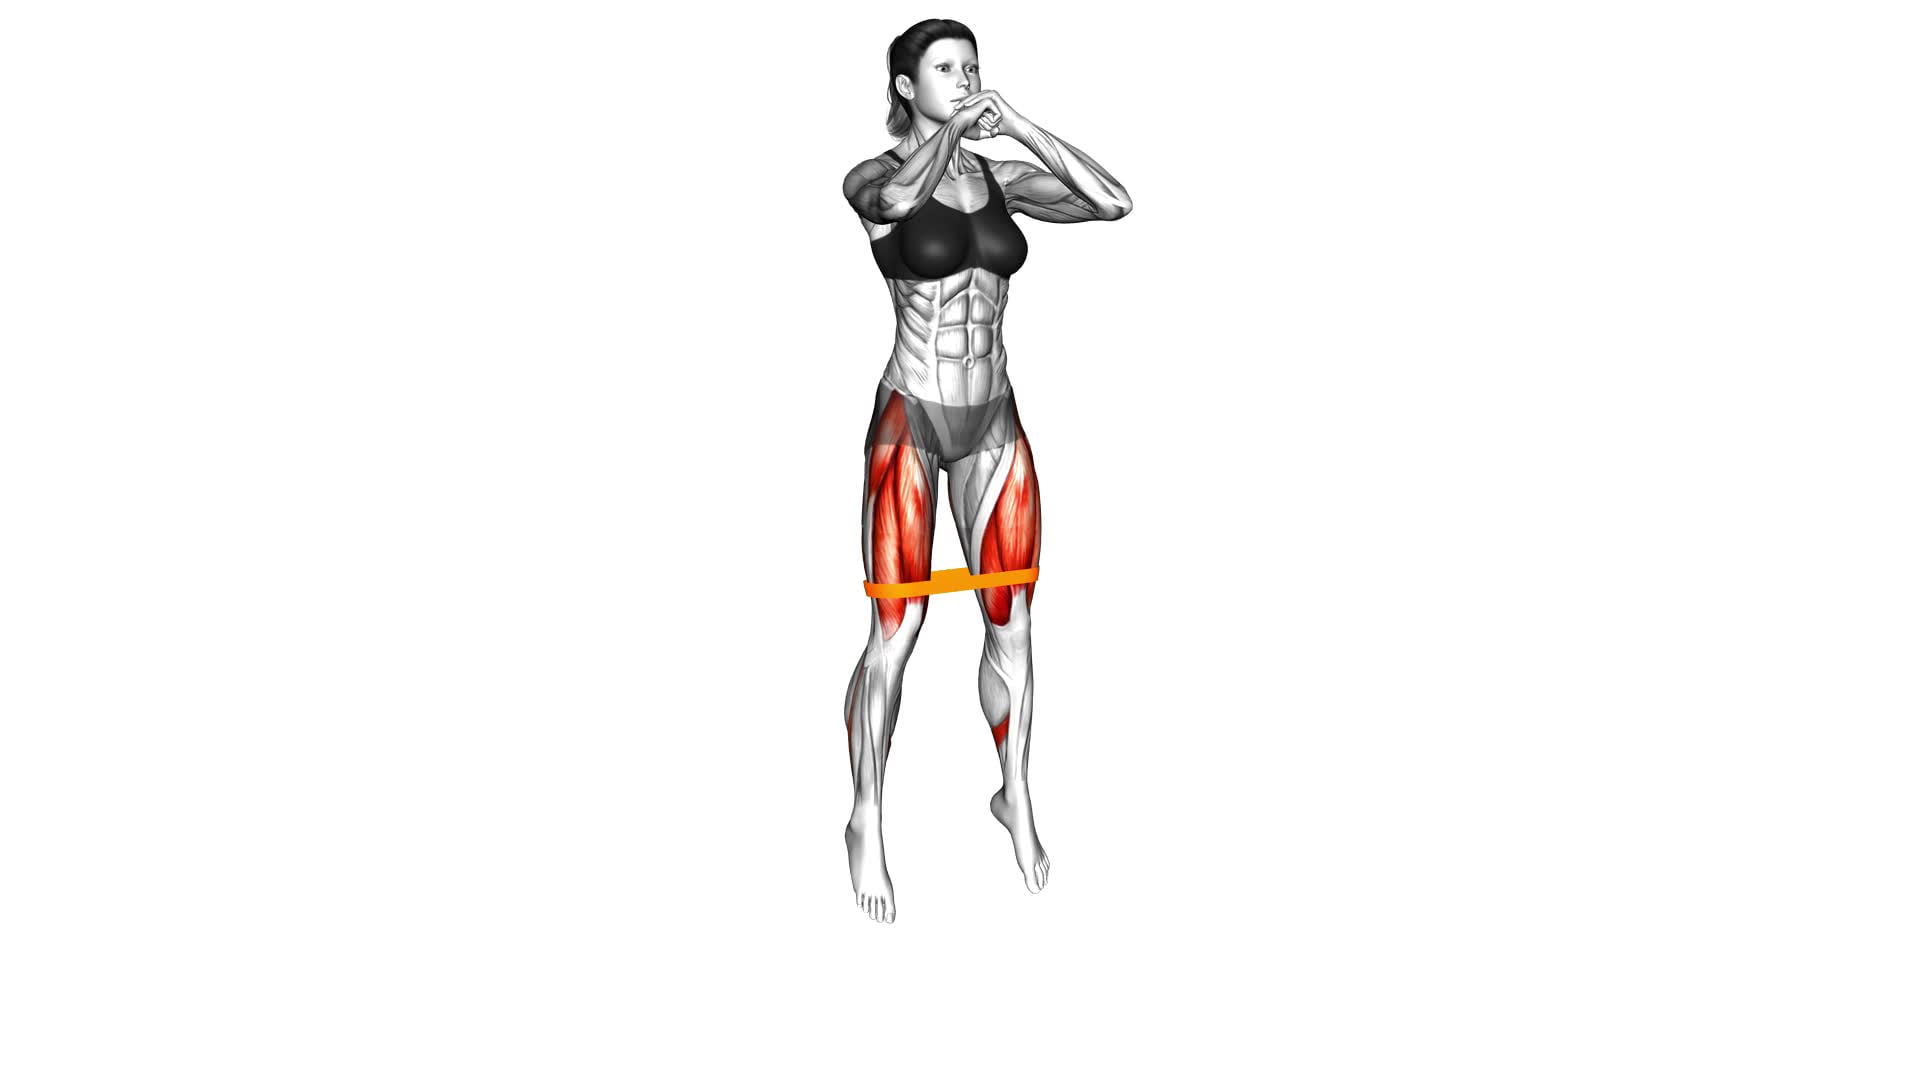 Resistance Band Squat Jump (female) - Video Exercise Guide & Tips